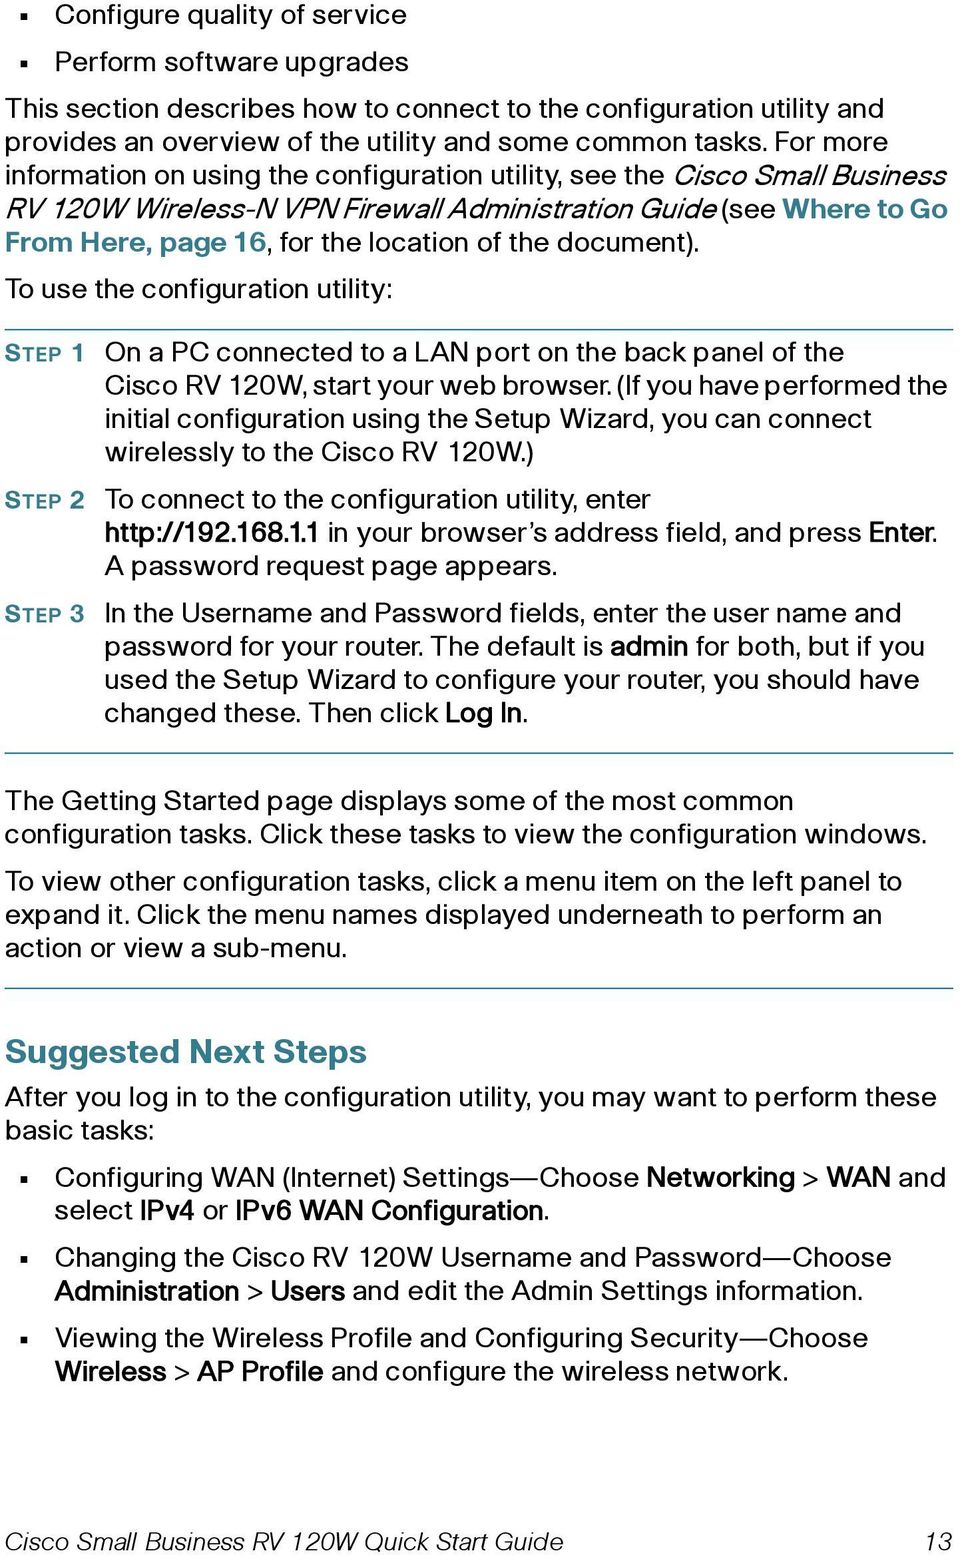 document). To use the configuration utility: STEP 1 STEP 2 STEP 3 On a PC connected to a LAN port on the back panel of the Cisco RV 120W, start your web browser.